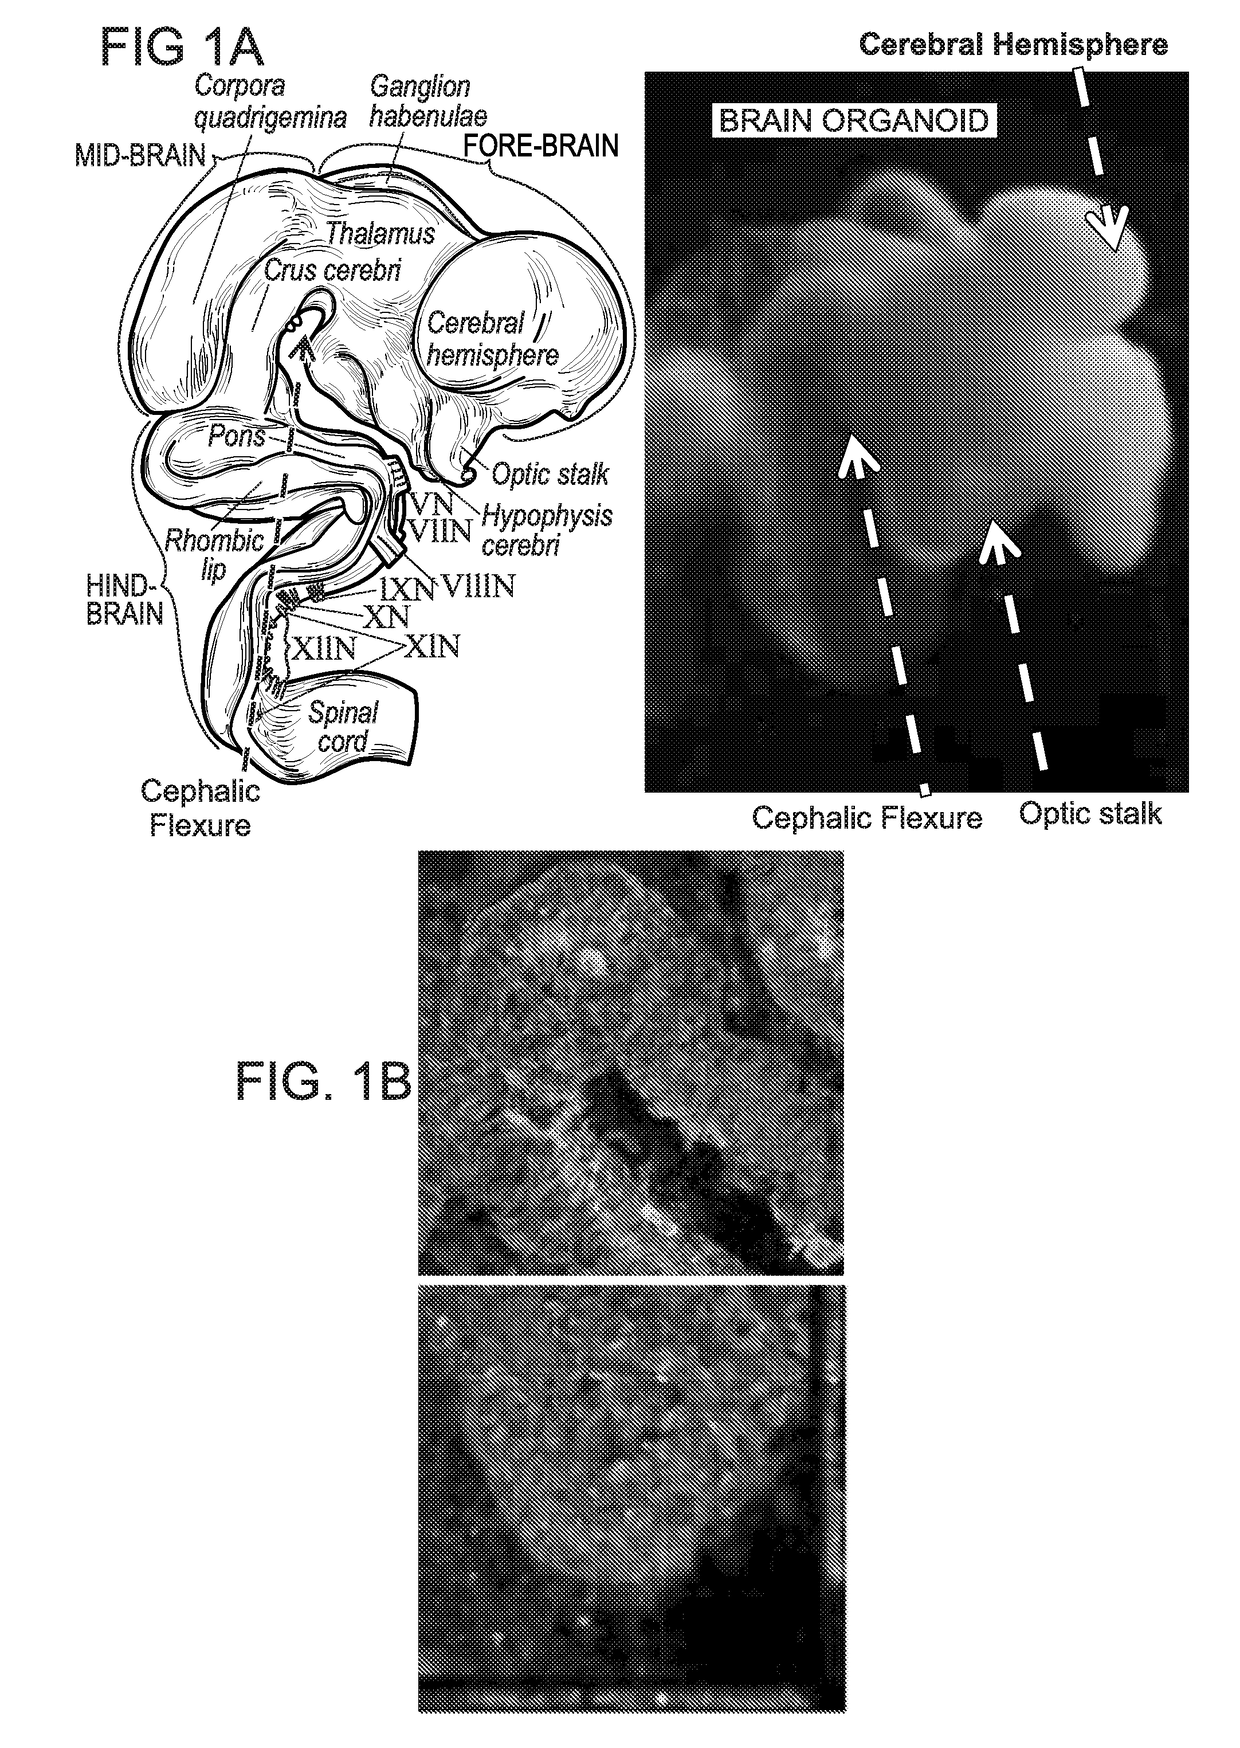 A neural organoid composition and methods of use